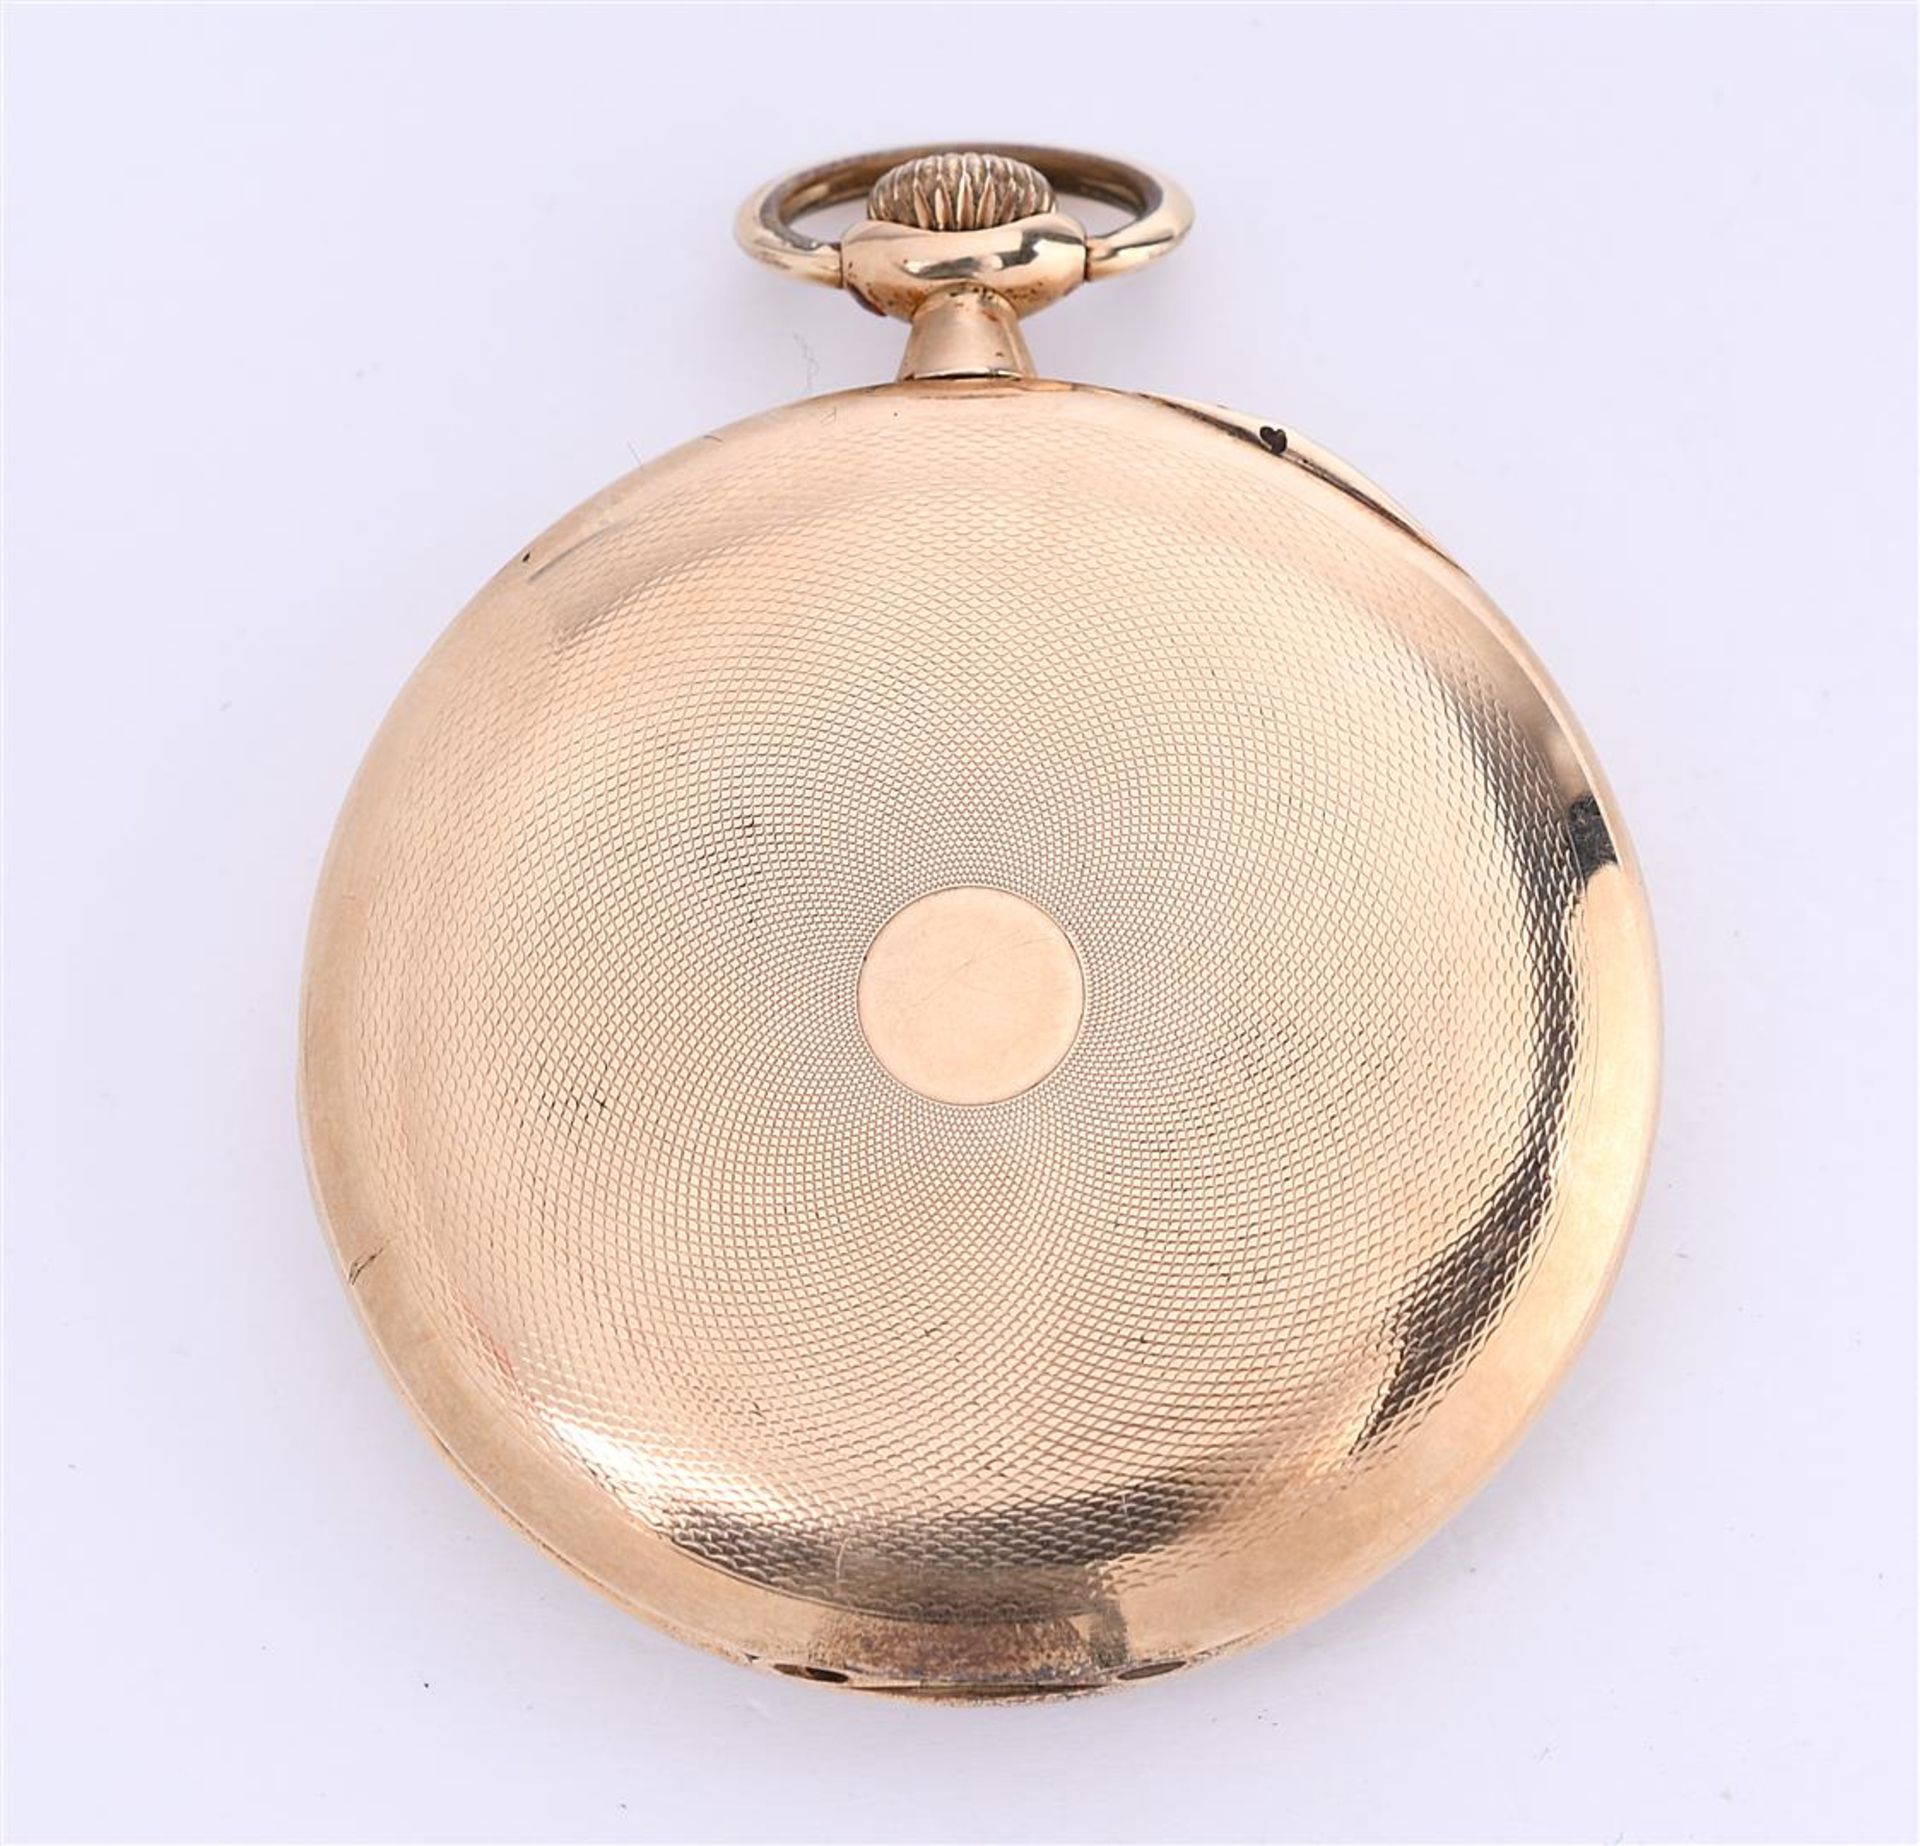 14 kt yellow gold pocket watch with Arabic numerals and second hand. ca. 1925 - Image 2 of 4